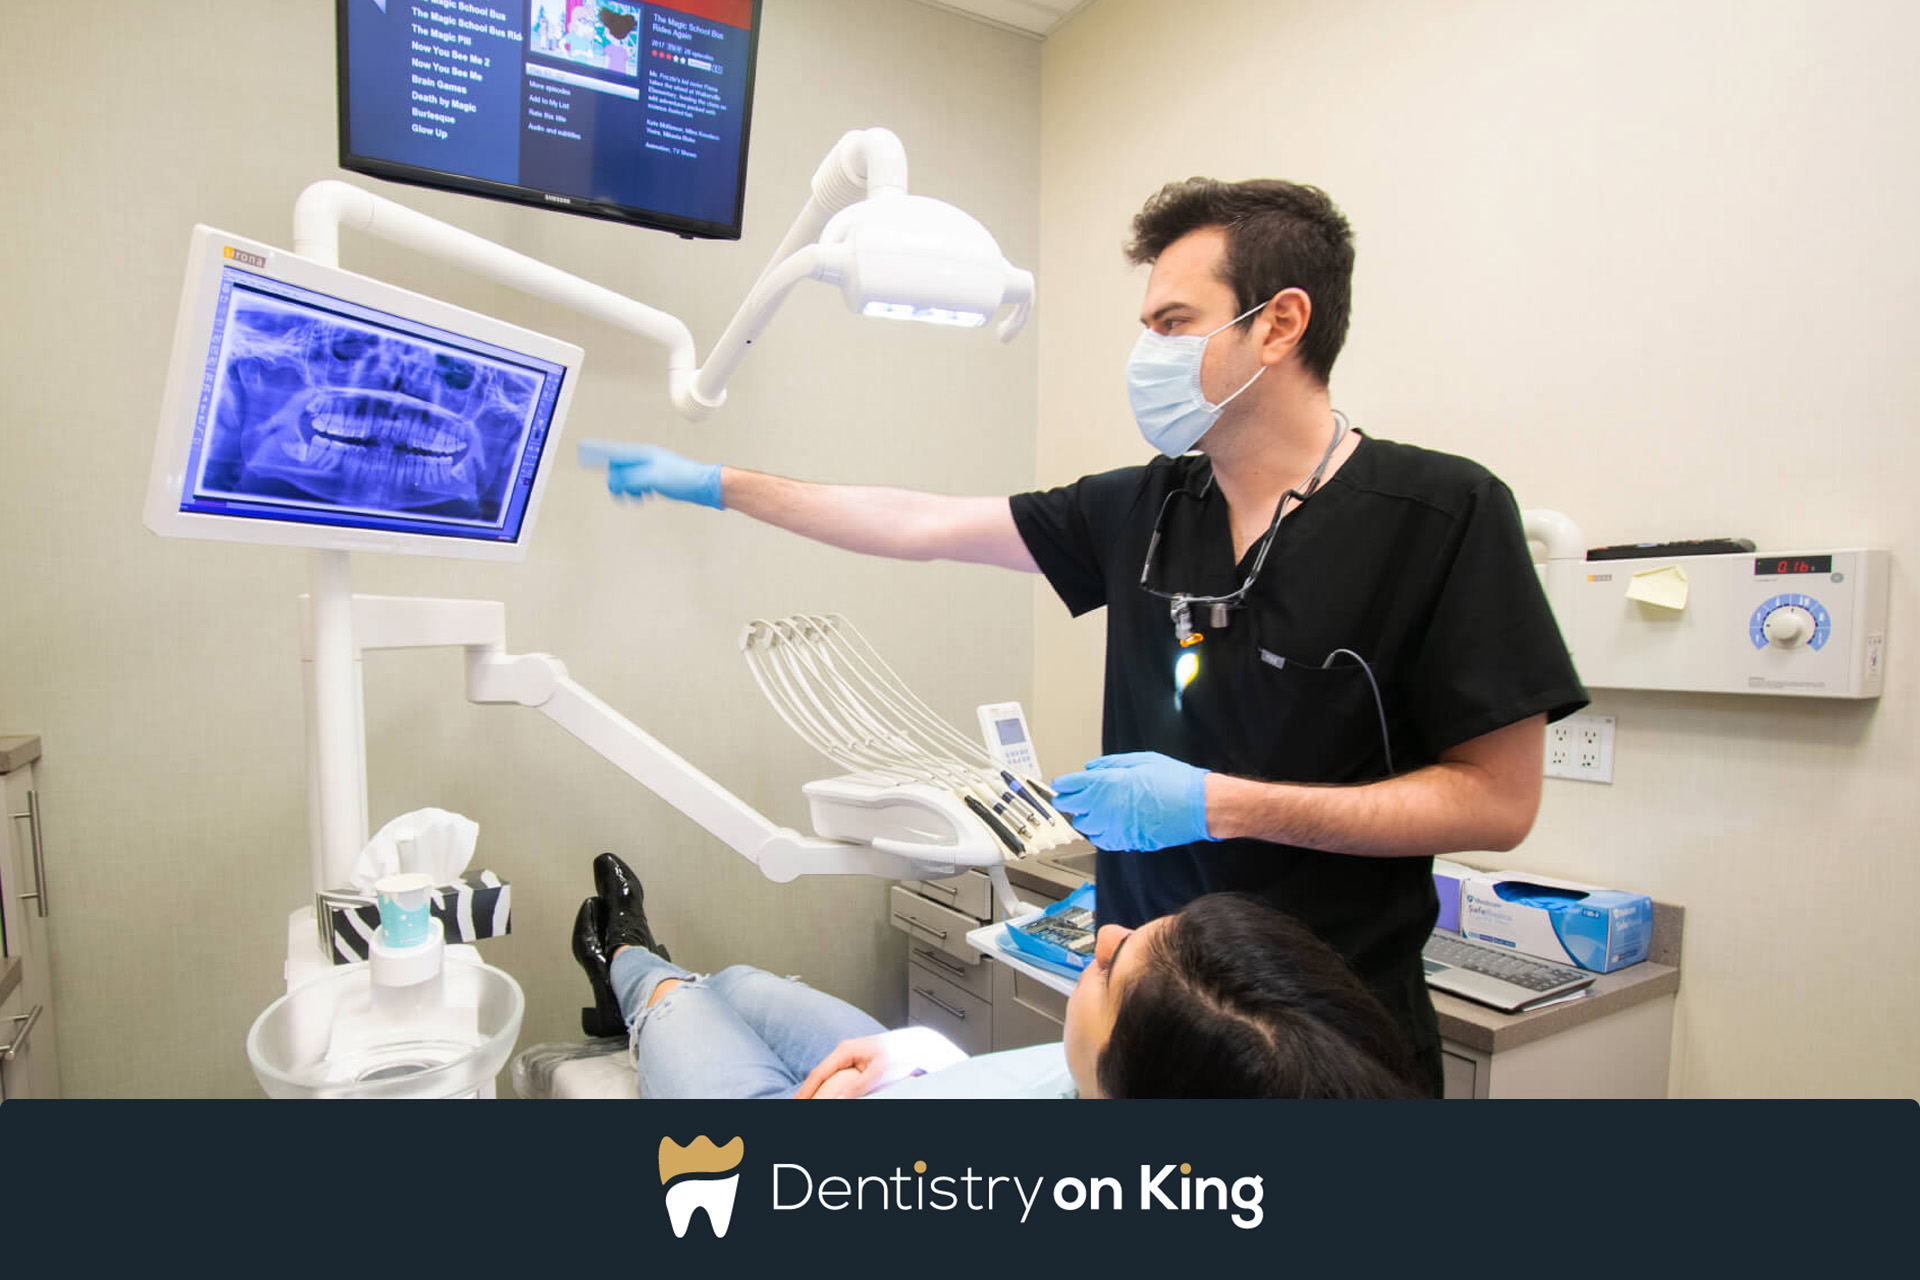 Dentistry on King